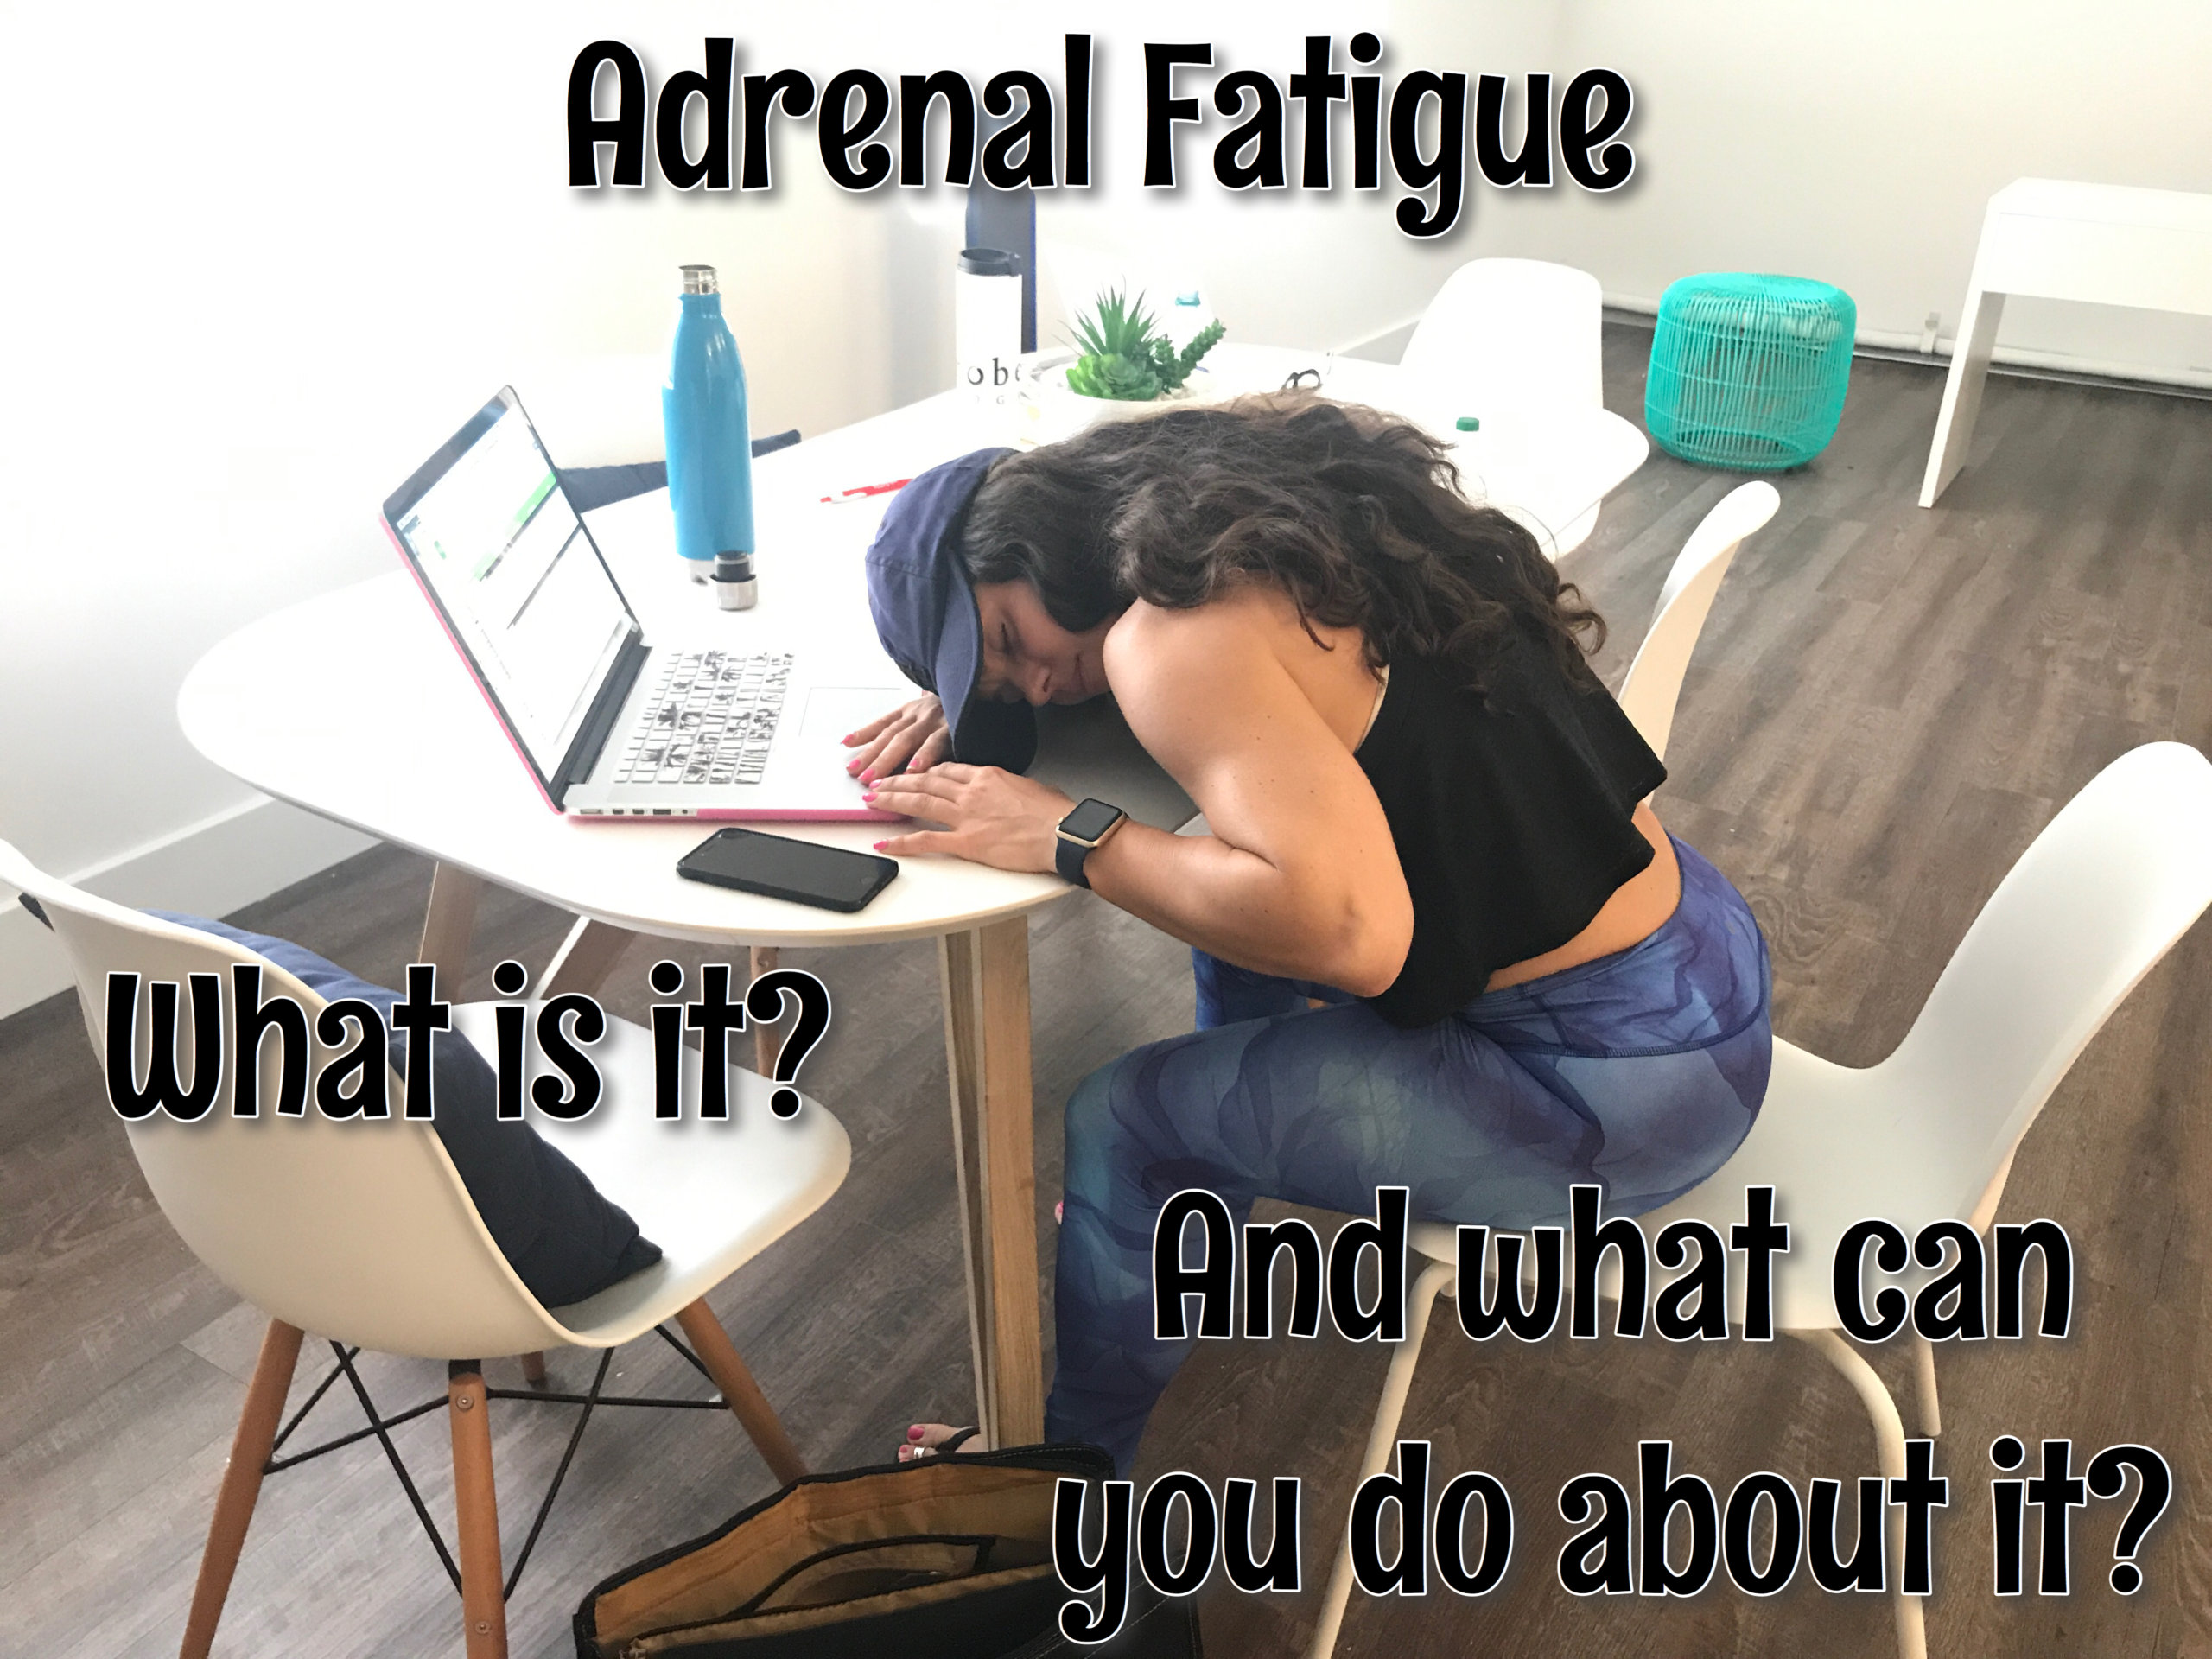 Adrenal Fatigue: What Is It? And What Can You Do About It?